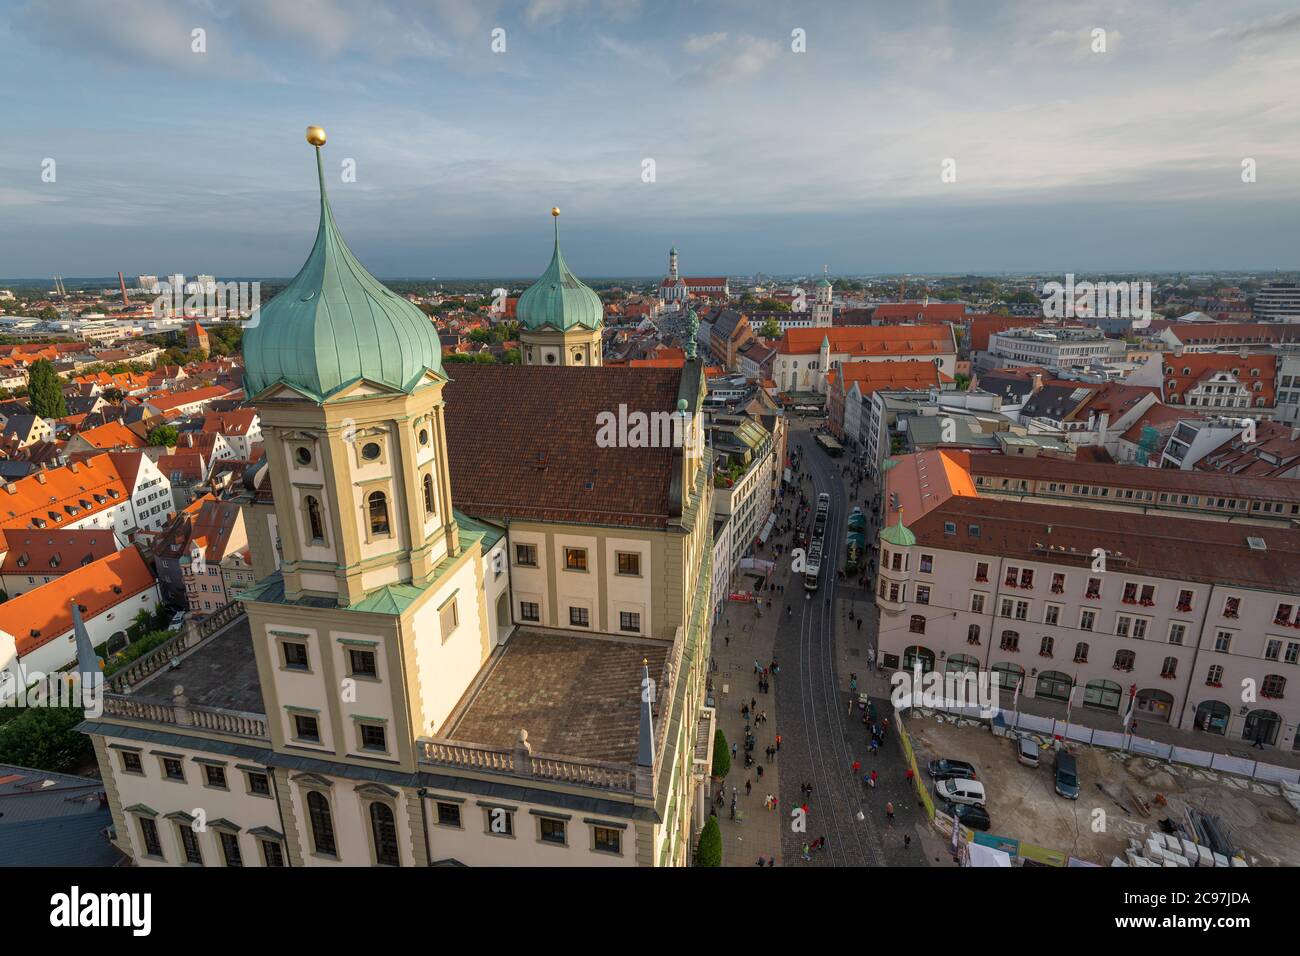 Augsburg, Germany city skyline with the old domes of the renaissance styled city hall building. Stock Photo